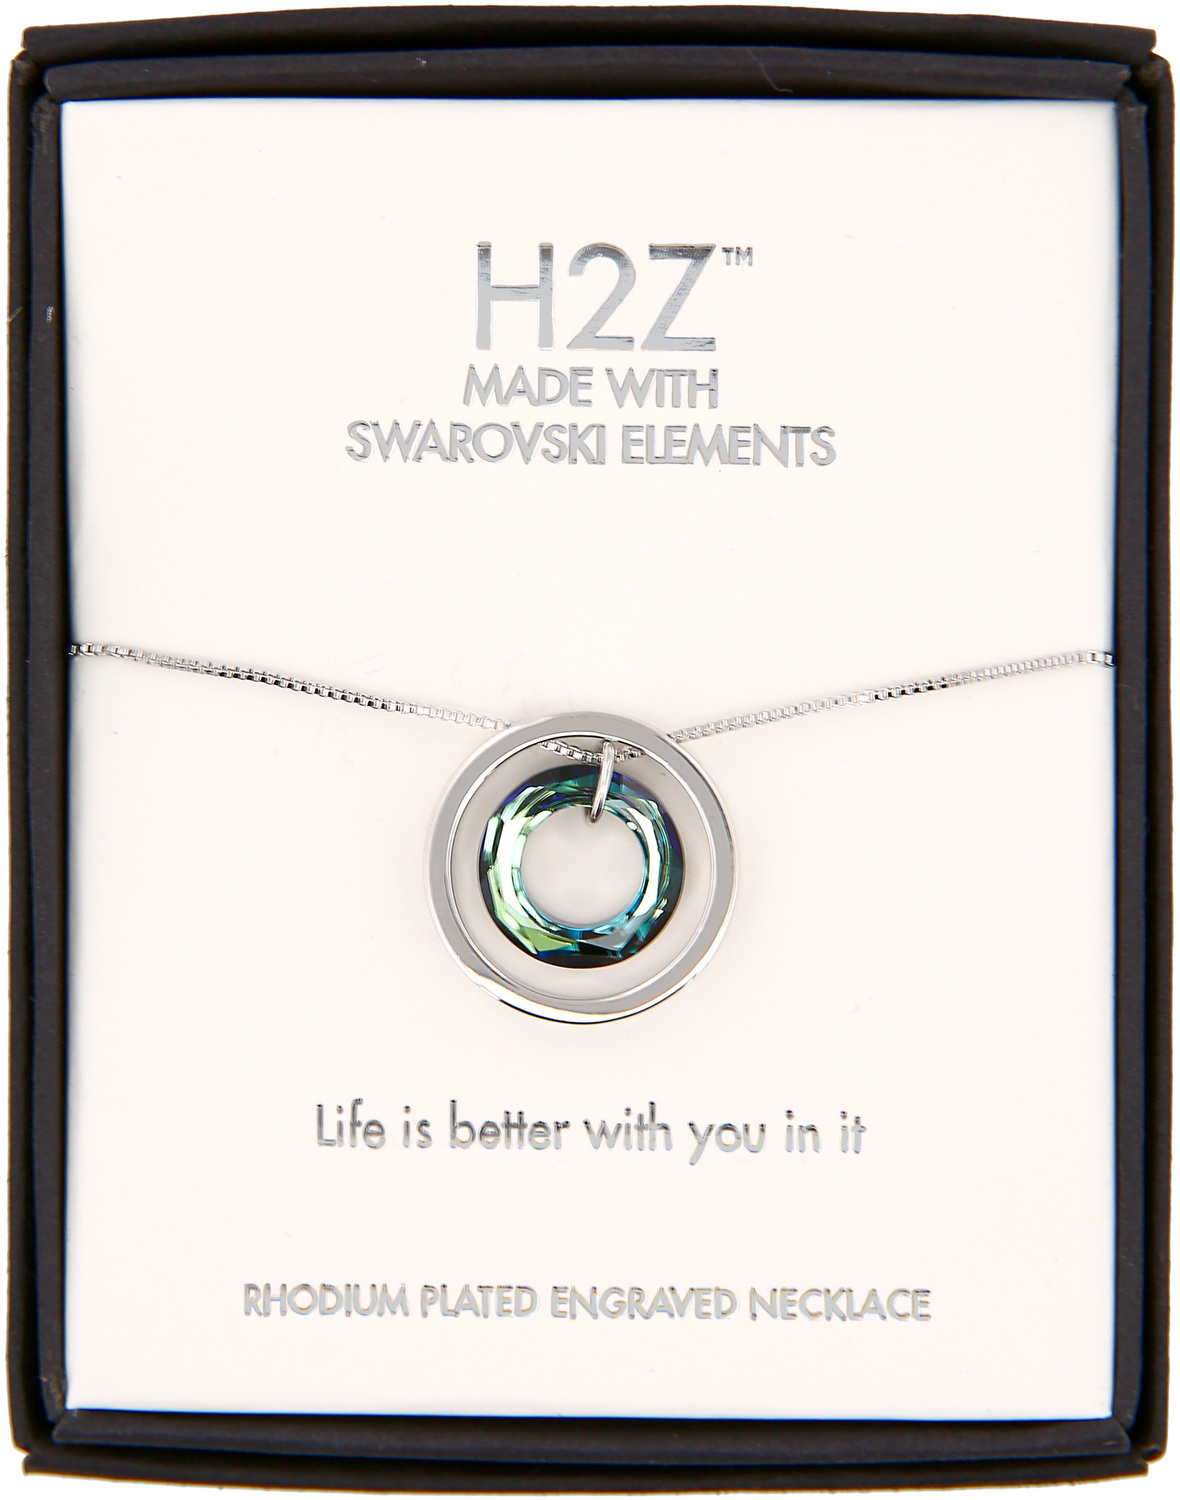 Life
Bermuda Blue Crystal by H2Z Made with Swarovski Elements - Life
Bermuda Blue Crystal - 17"-19" Engraved Rhodium Plated Austrian Element Necklace